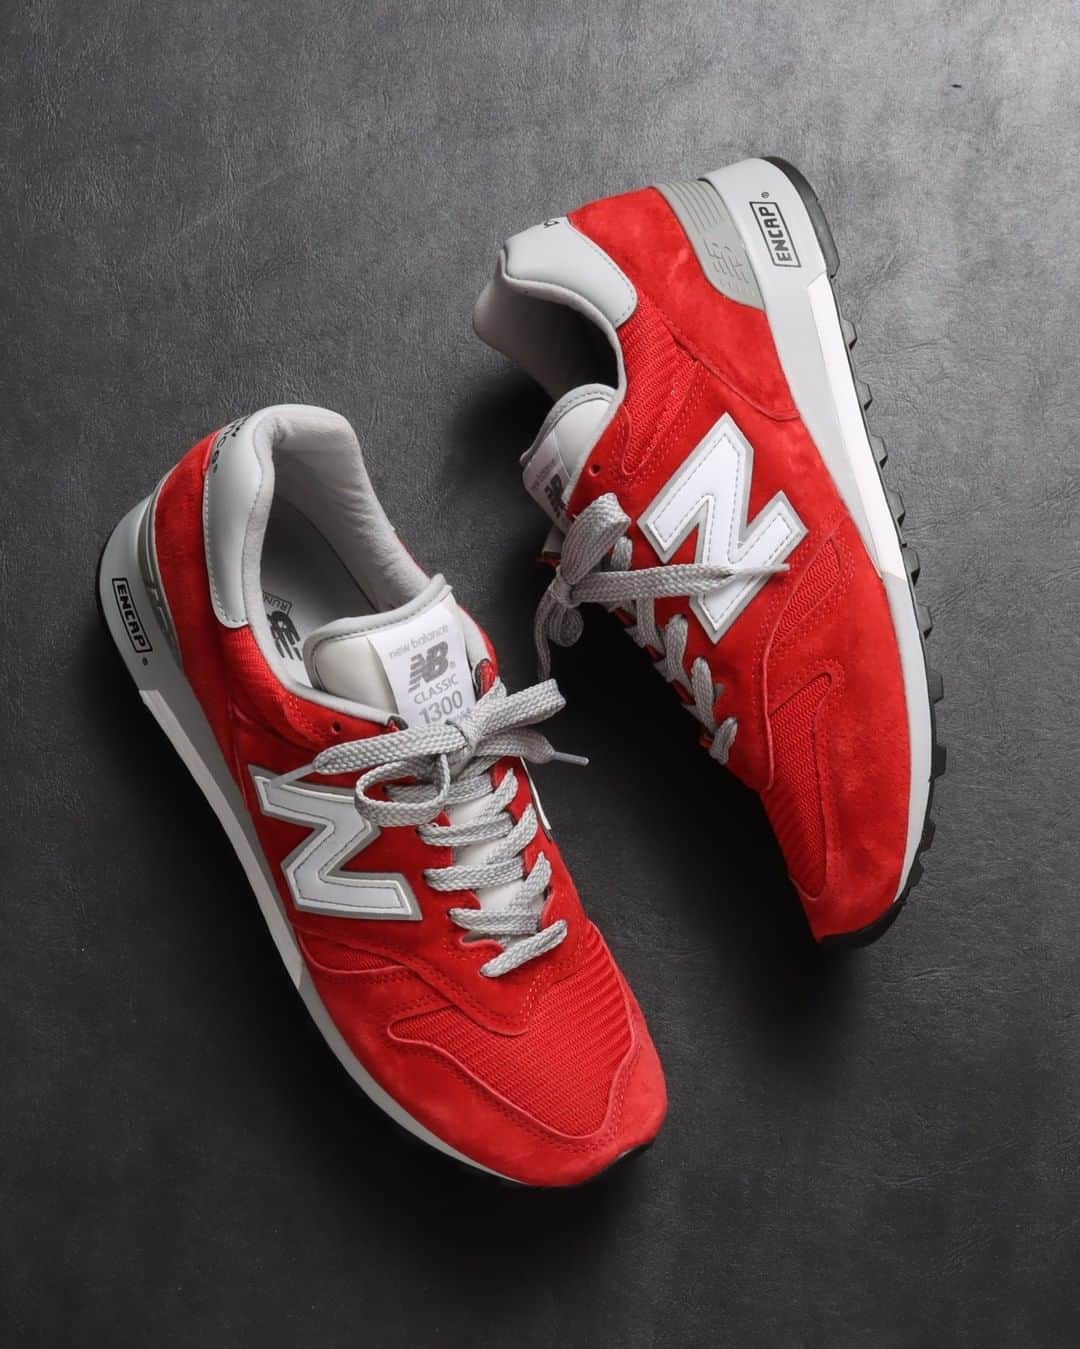 アトモスさんのインスタグラム写真 - (アトモスInstagram)「. NOW ON SALE New Balance M1300CLR ニューバランス初の「1000」番代として1985年に登場して以来、その卓越した履き心地と完成されたデザインで時代を超えてタイムレスな人気を博している伝説のモデル「1300」。M1300CLはオリジナルである「M1300」から派生したクラシックモデル。ソール全体にENCAPソールを用いているM1300に対して、CLでは前方にC-CAPを取り入れ屈曲性を高めている。レッドのベースカラーにホワイトNロゴを配し、ピッグスキンスエード/メッシュアッパーで展開。 New Balanceならではの高級感はそのままに、遊び心を兼ね備えスタイリングのアクセントとして使用できる。 . Since its introduction in 1985 as New Balance's first "1000" generation, the legendary model "1300" has gained timeless popularity due to its outstanding comfort and perfected design. The M1300CL is a classic model derived from the original "M1300". In contrast to the M1300, which uses an ENCAP sole for the entire sole, the CL incorporates a C-CAP in the front to increase flexibility. The white N logo is placed on the red base color, and it is developed with pigskin suede / mesh upper. It can be used as a styling accent with a playfulness while maintaining the luxury of New Balance. . #atmos #newbalance #m1300clr #m1300 #nb #アトモス #ニューバランス」2月21日 18時00分 - atmos_japan